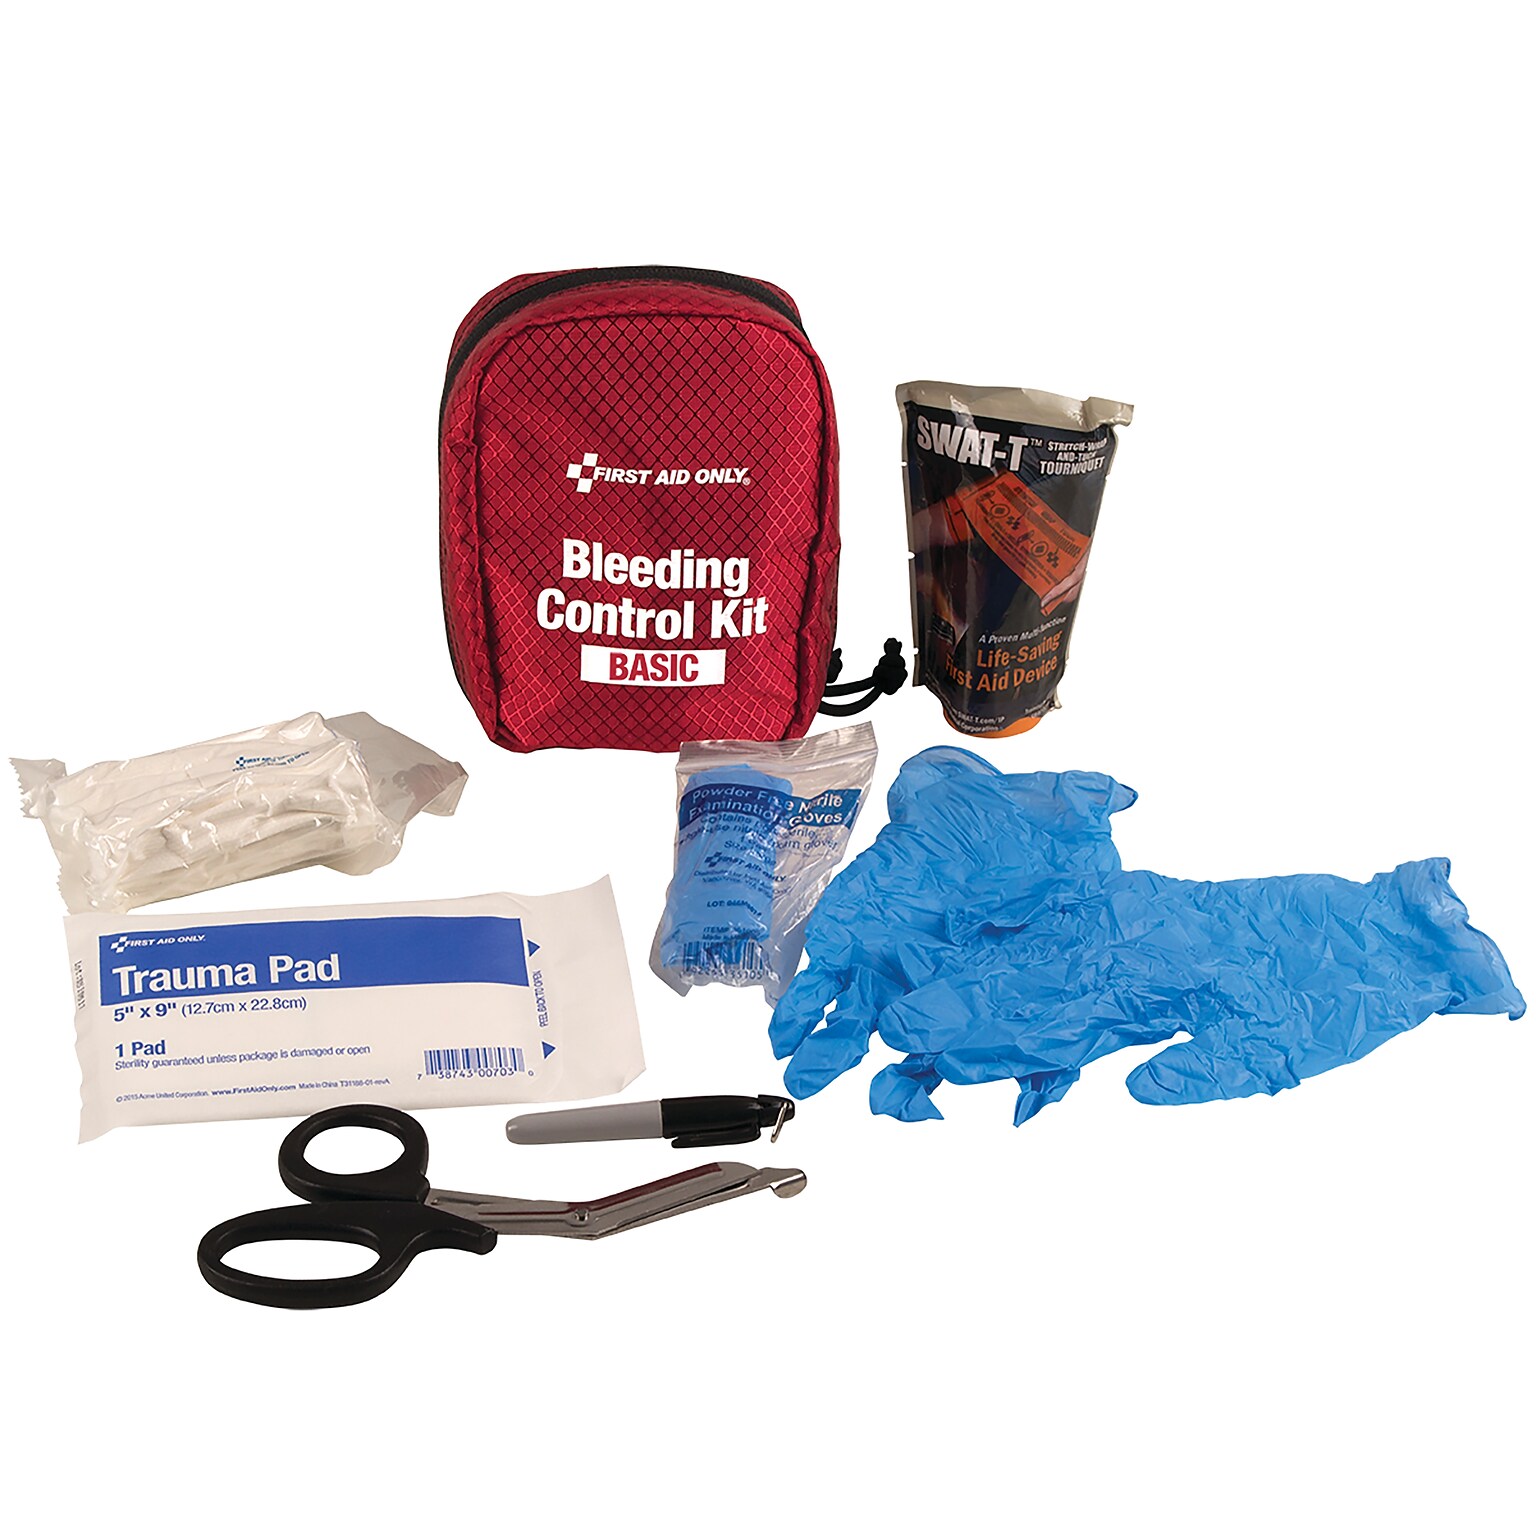 First Aid Only Basic Bleeding Control Kit (91061)